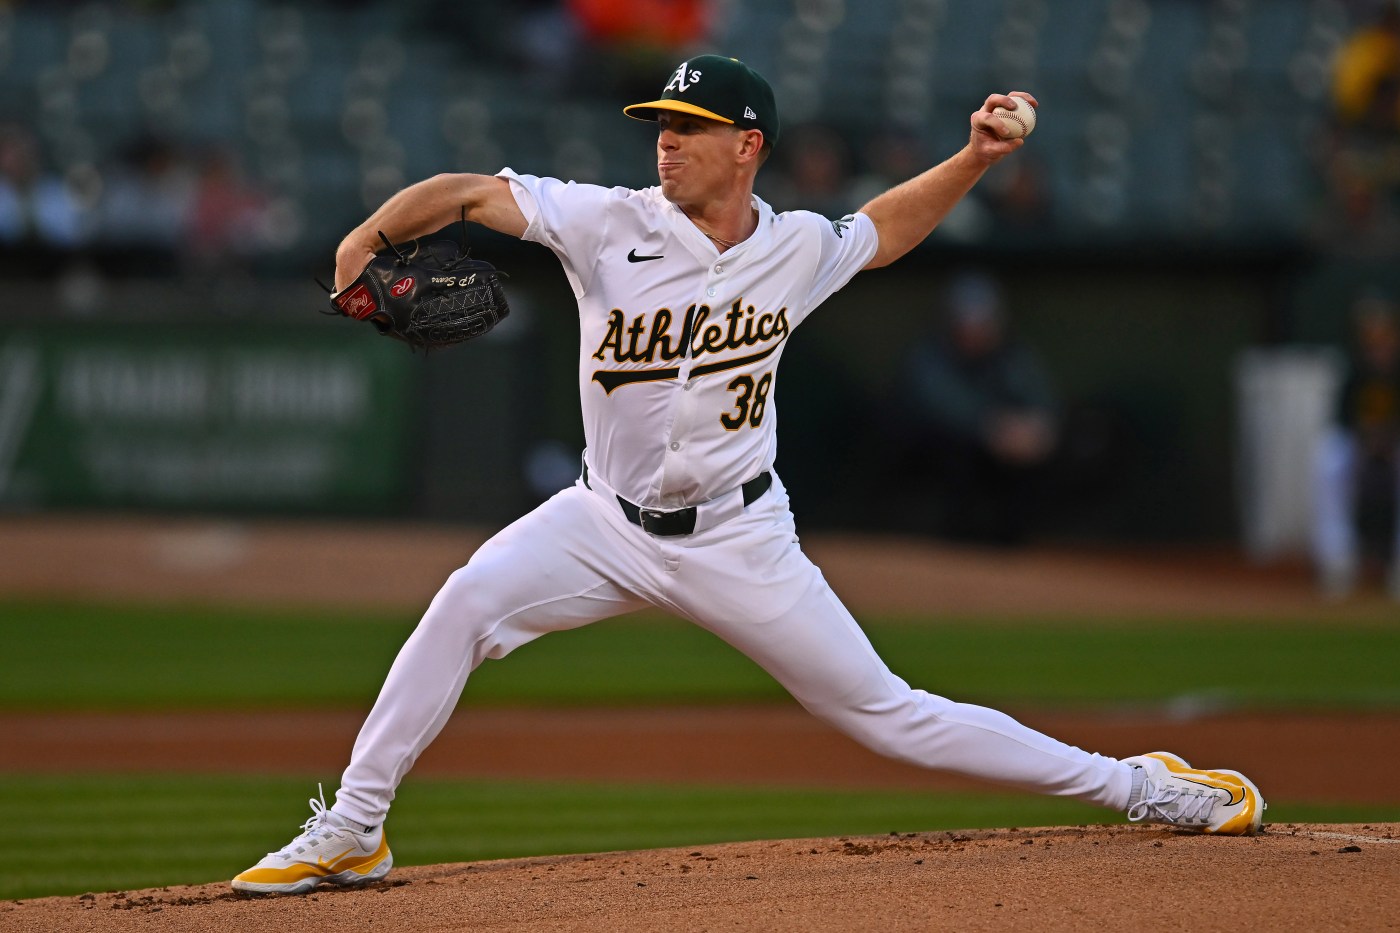 sears-spins-quality-start-as-a’s-win-fifth-straight-game